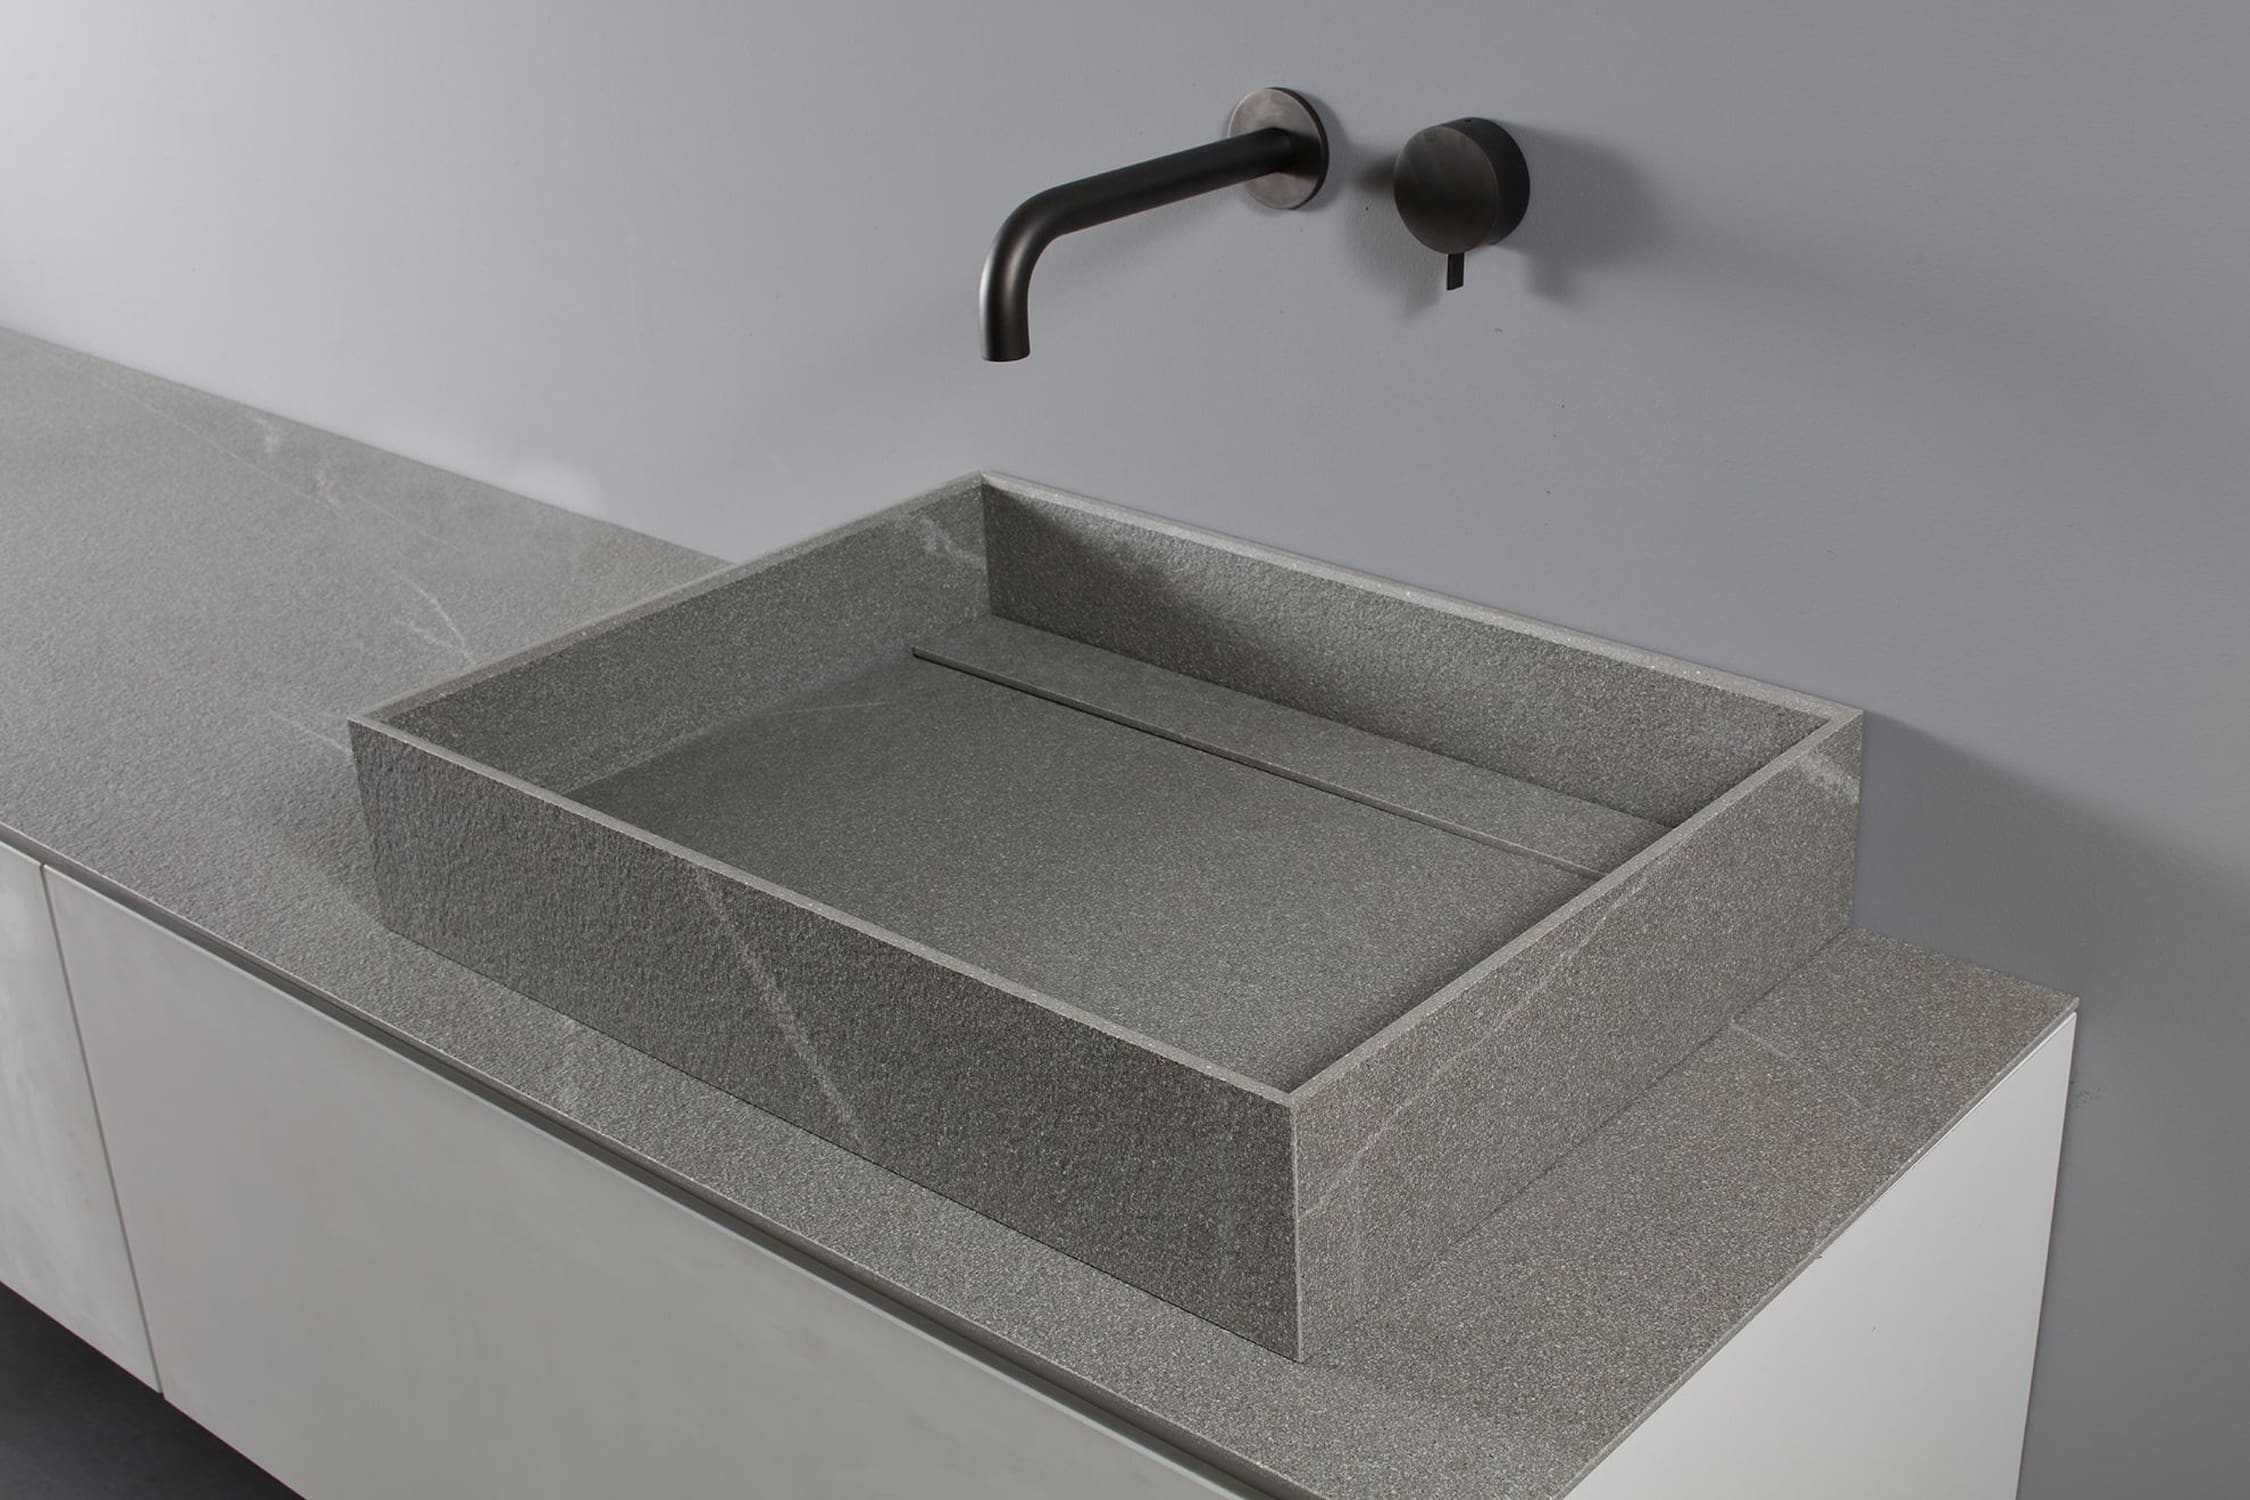 Over-the-counter washbasin in porcelain stoneware.